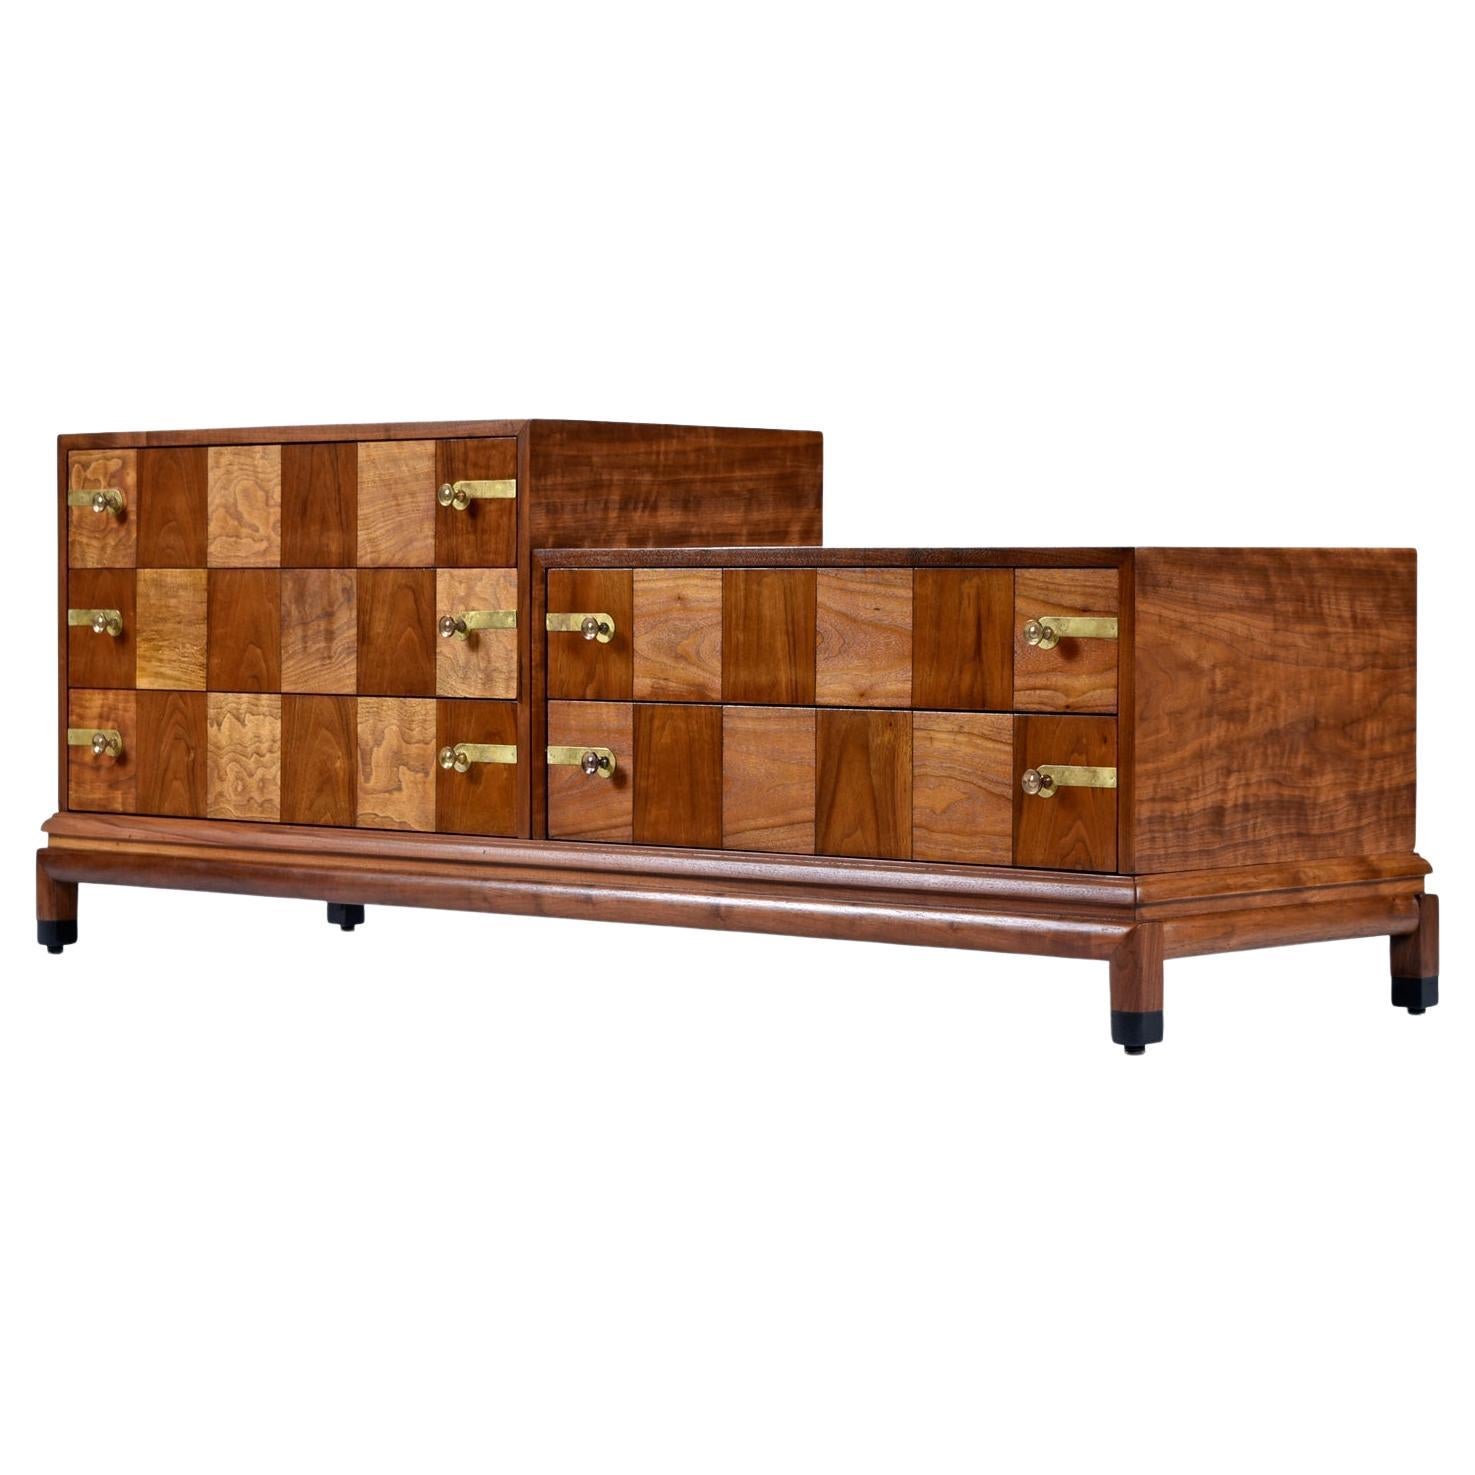 Stately.  No other word best represents this exceptional Renzo Rutili credenza / dresser.  The fusion of British Colonial, Far East, Regency and Modern create a distinctive harmony, rarely found in such tasteful proportions.  Versatility abound. 